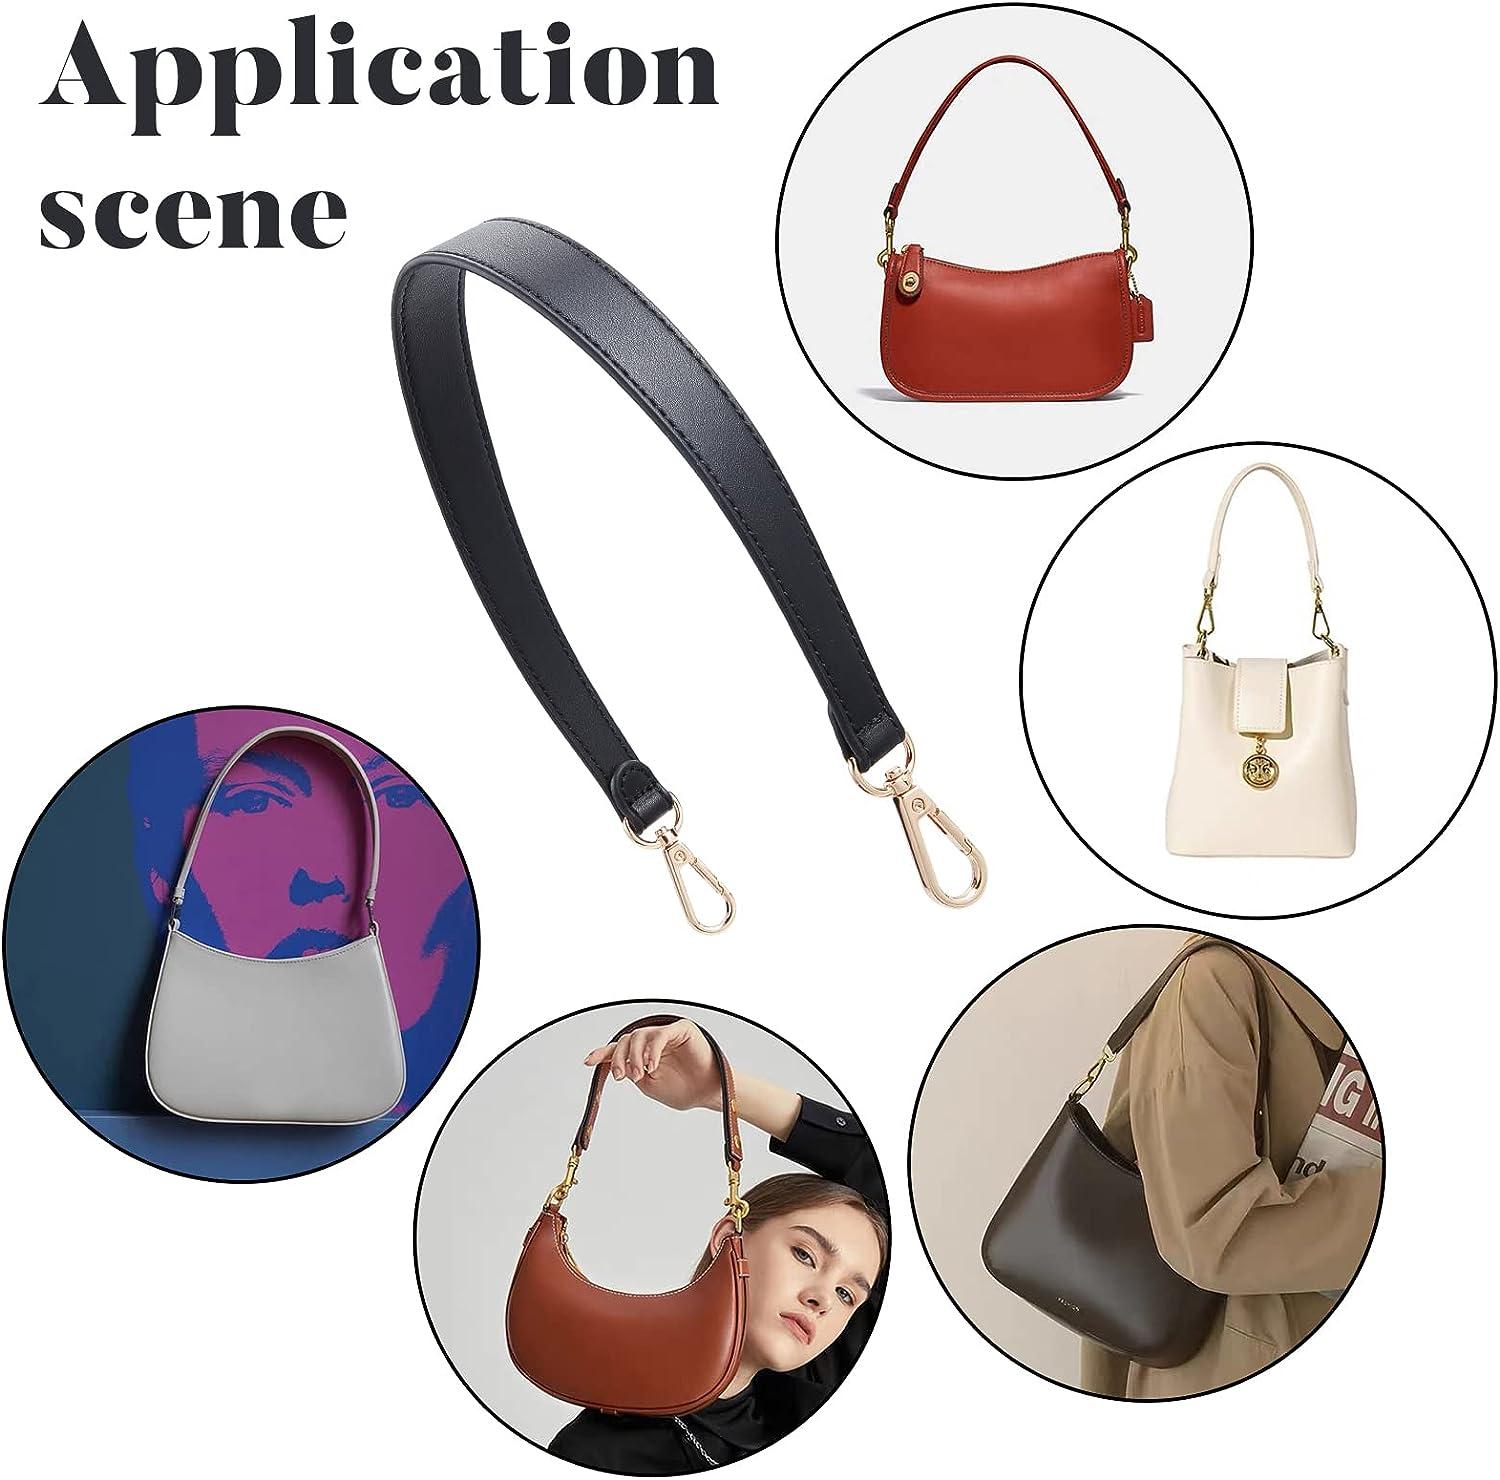 Buy TINTH Leather handbags, shoulder bag purse with long strap Zipper Inner  Material Polycotton Attractive Color- Brown at Amazon.in